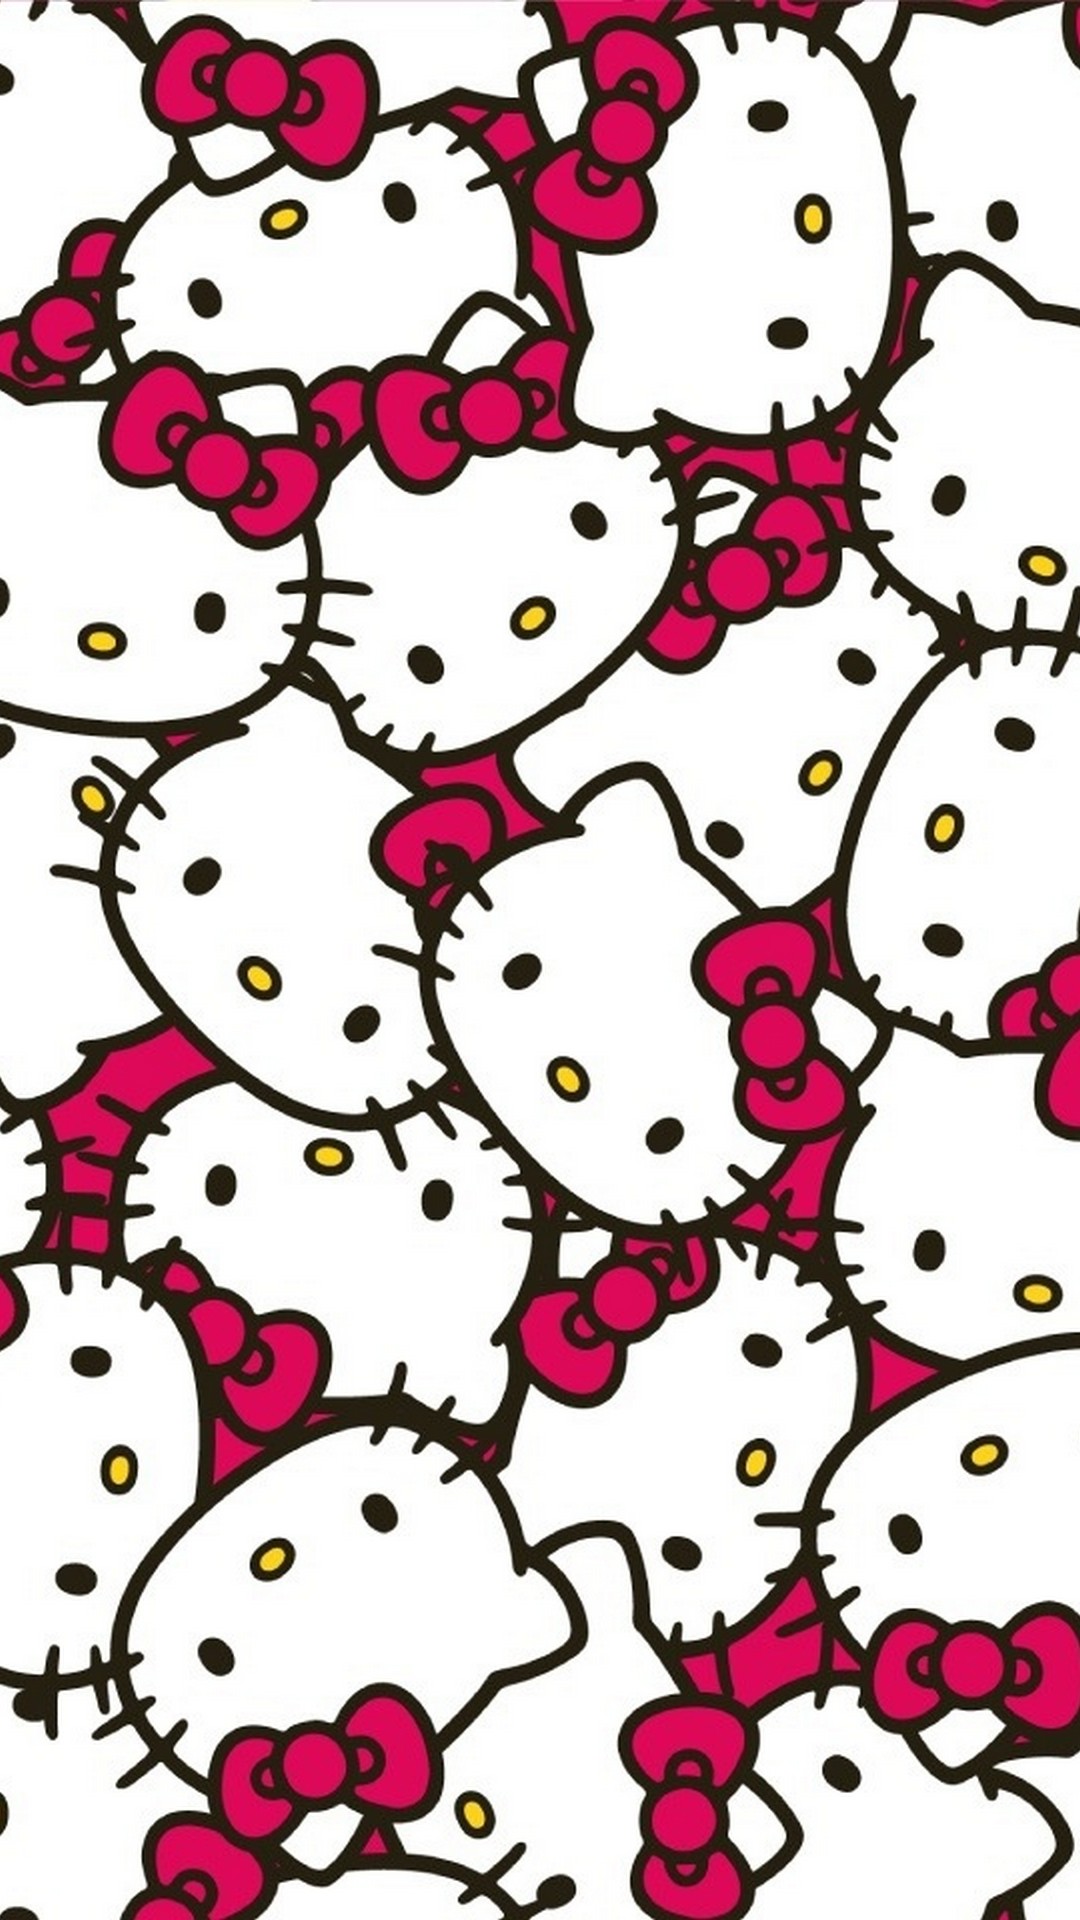 Hello Kitty Images Wallpaper iPhone with image resolution 1080x1920 pixel. You can make this wallpaper for your iPhone 5, 6, 7, 8, X backgrounds, Mobile Screensaver, or iPad Lock Screen